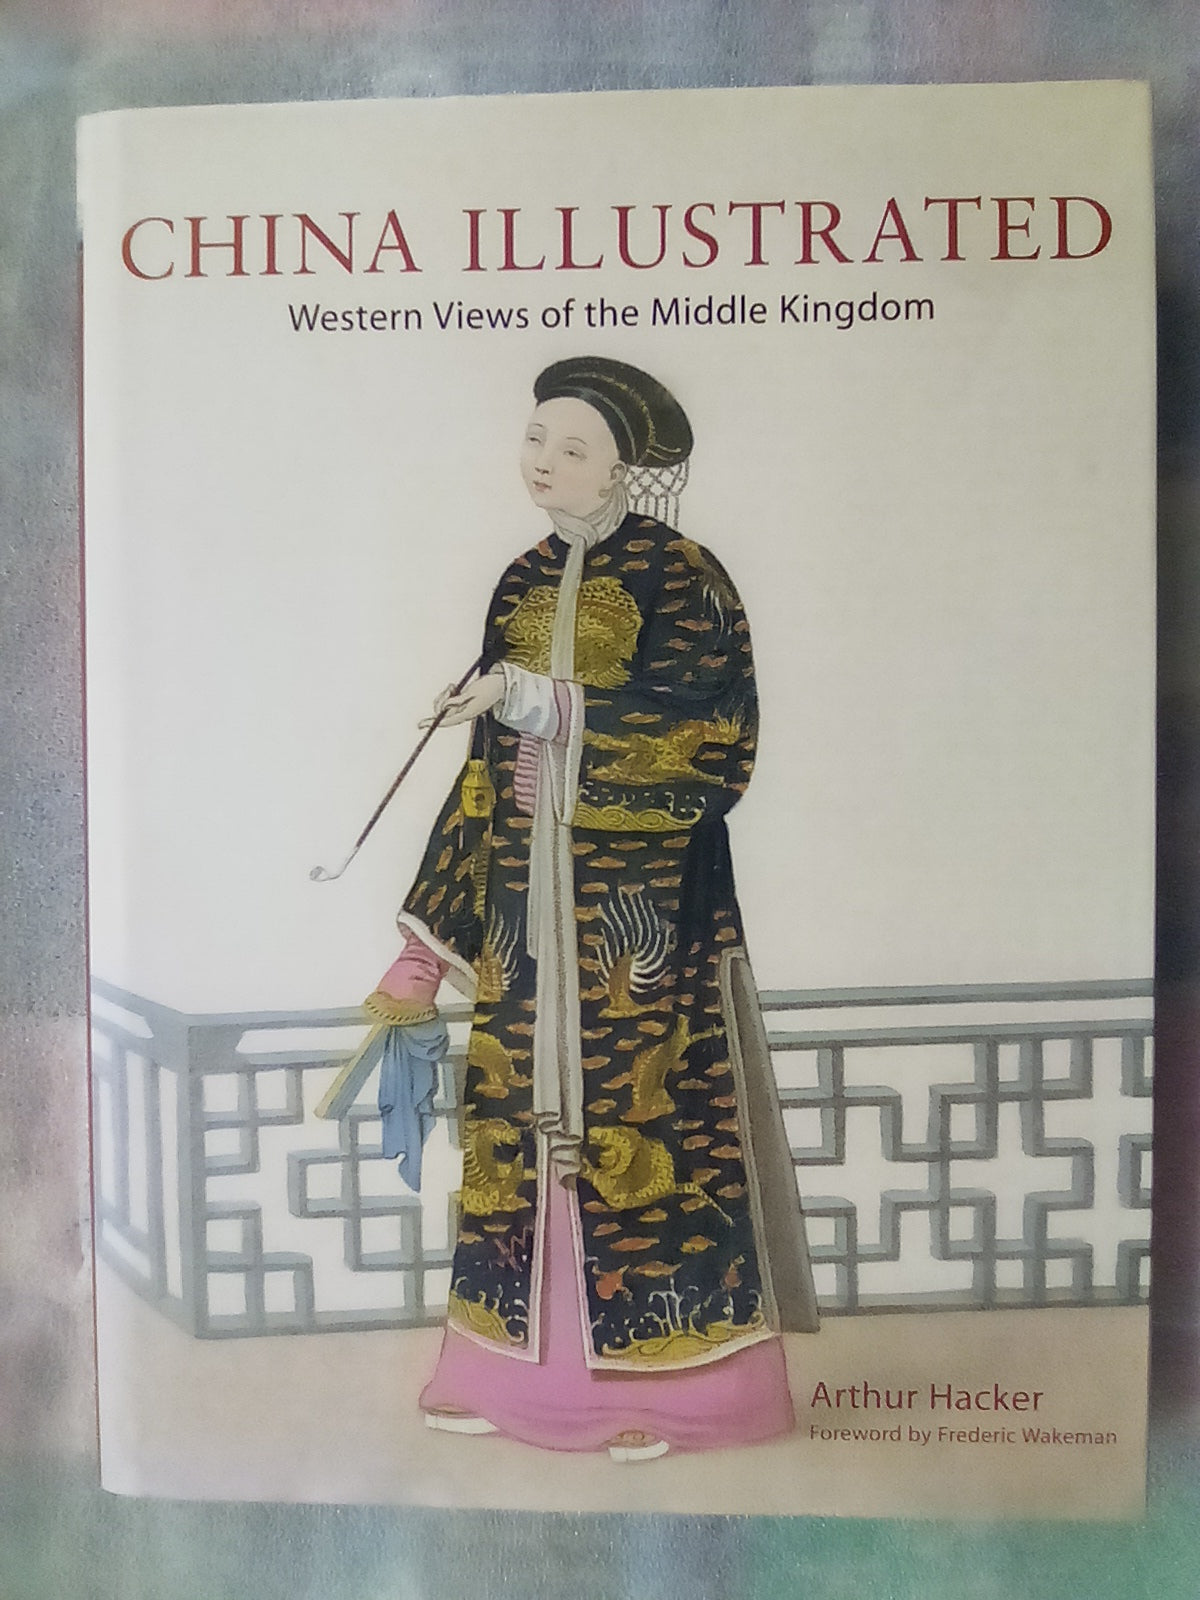 China Illustrated - Western Views of the Middle Kingdom by Arthur Hacker